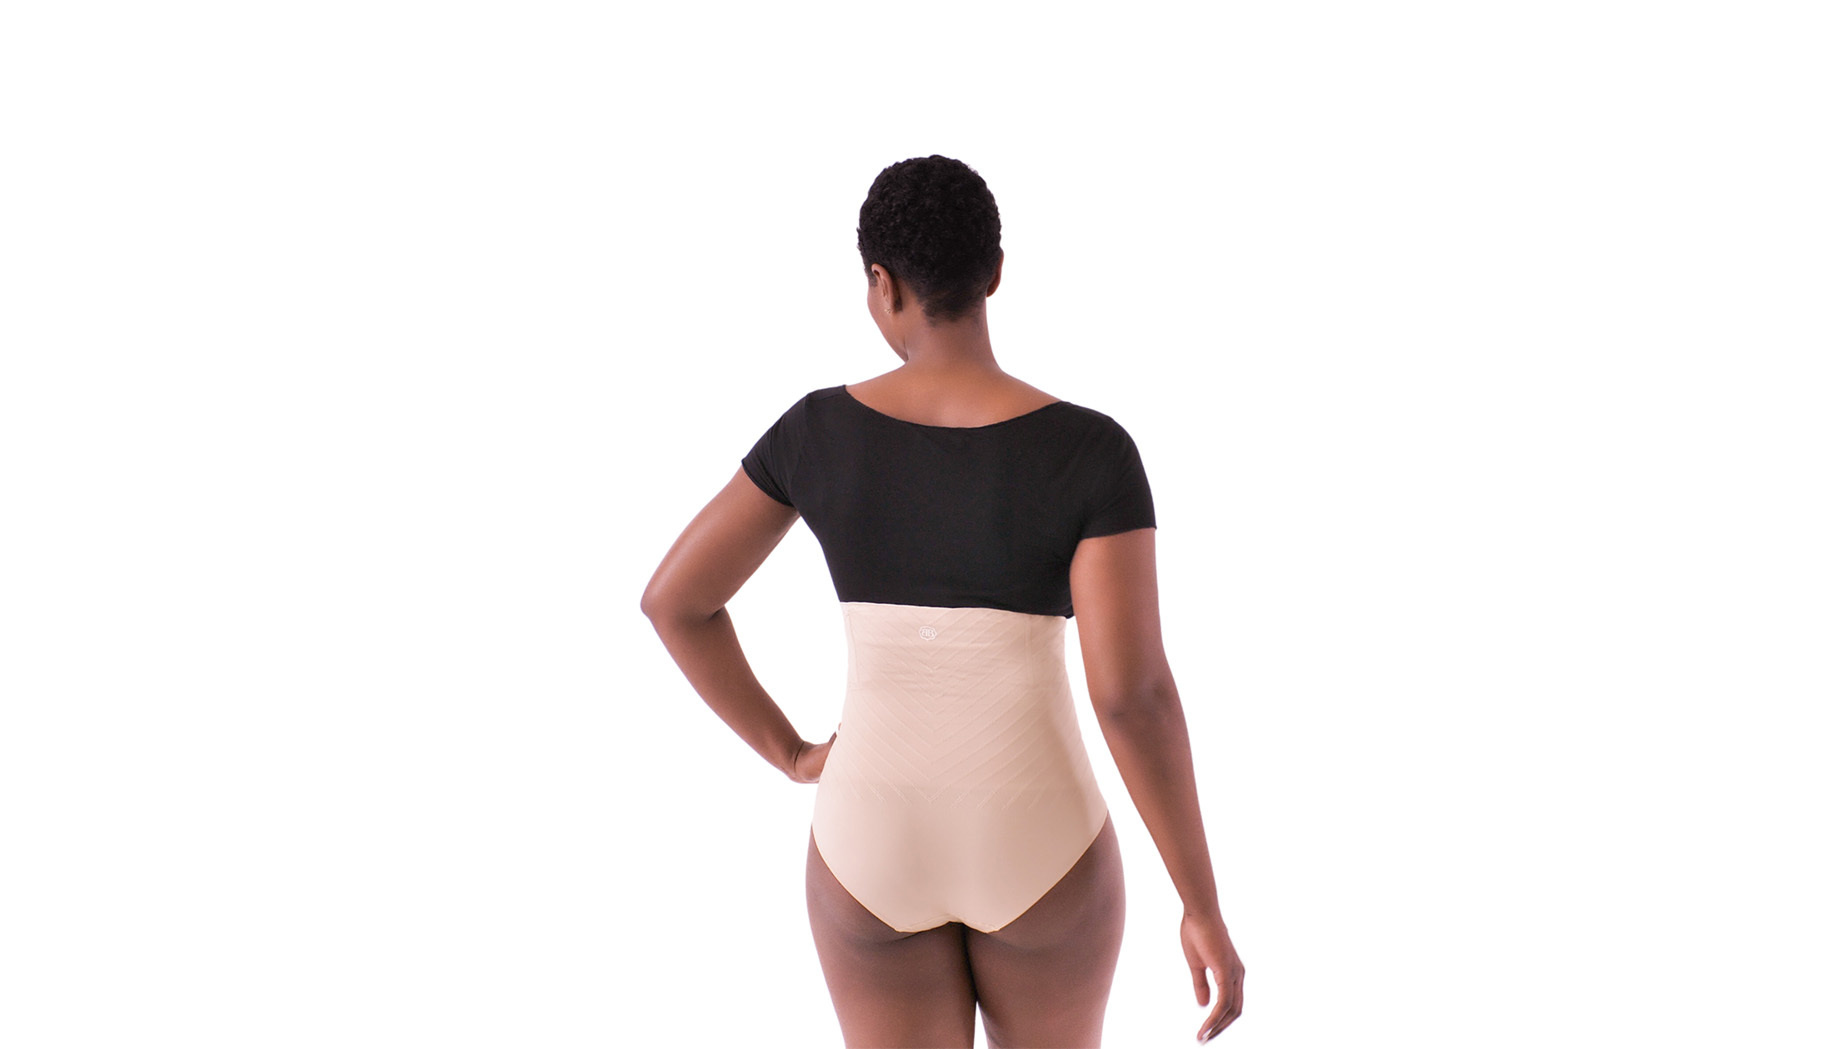 Shop Belly Bandit C-Section Postpartum Recovery Underwear